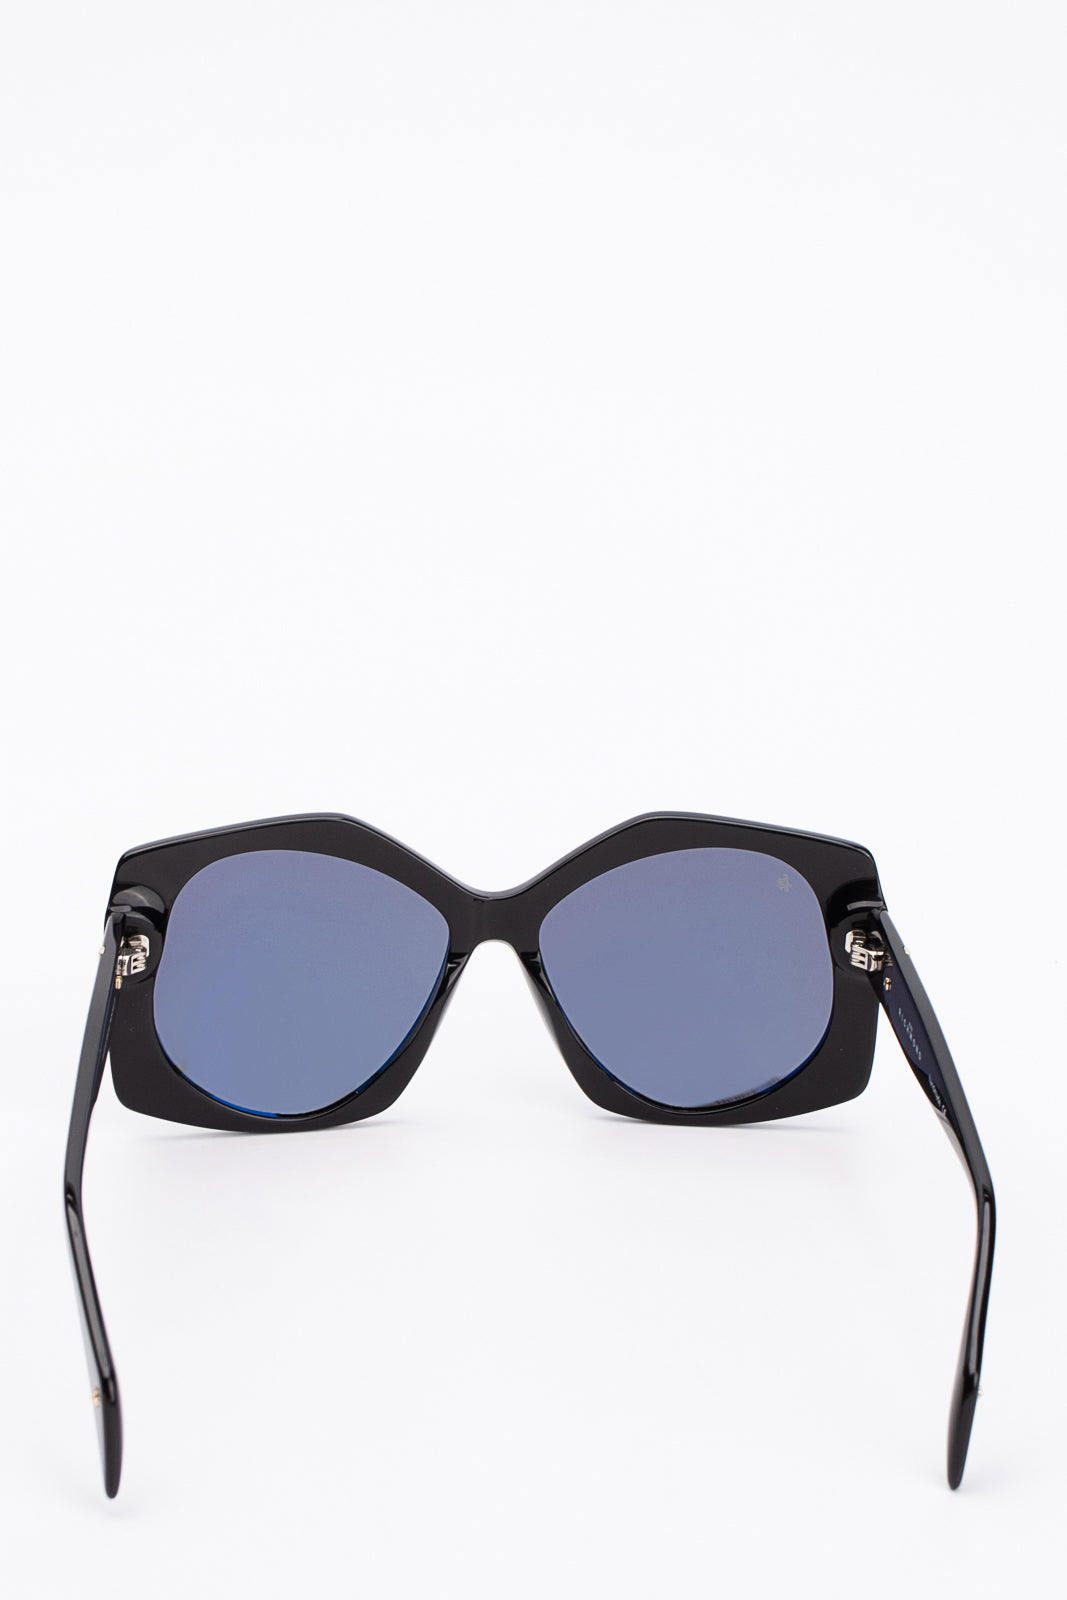 John Richmond Sunglasses With Pentagonal Lens - Limited Edition in Black